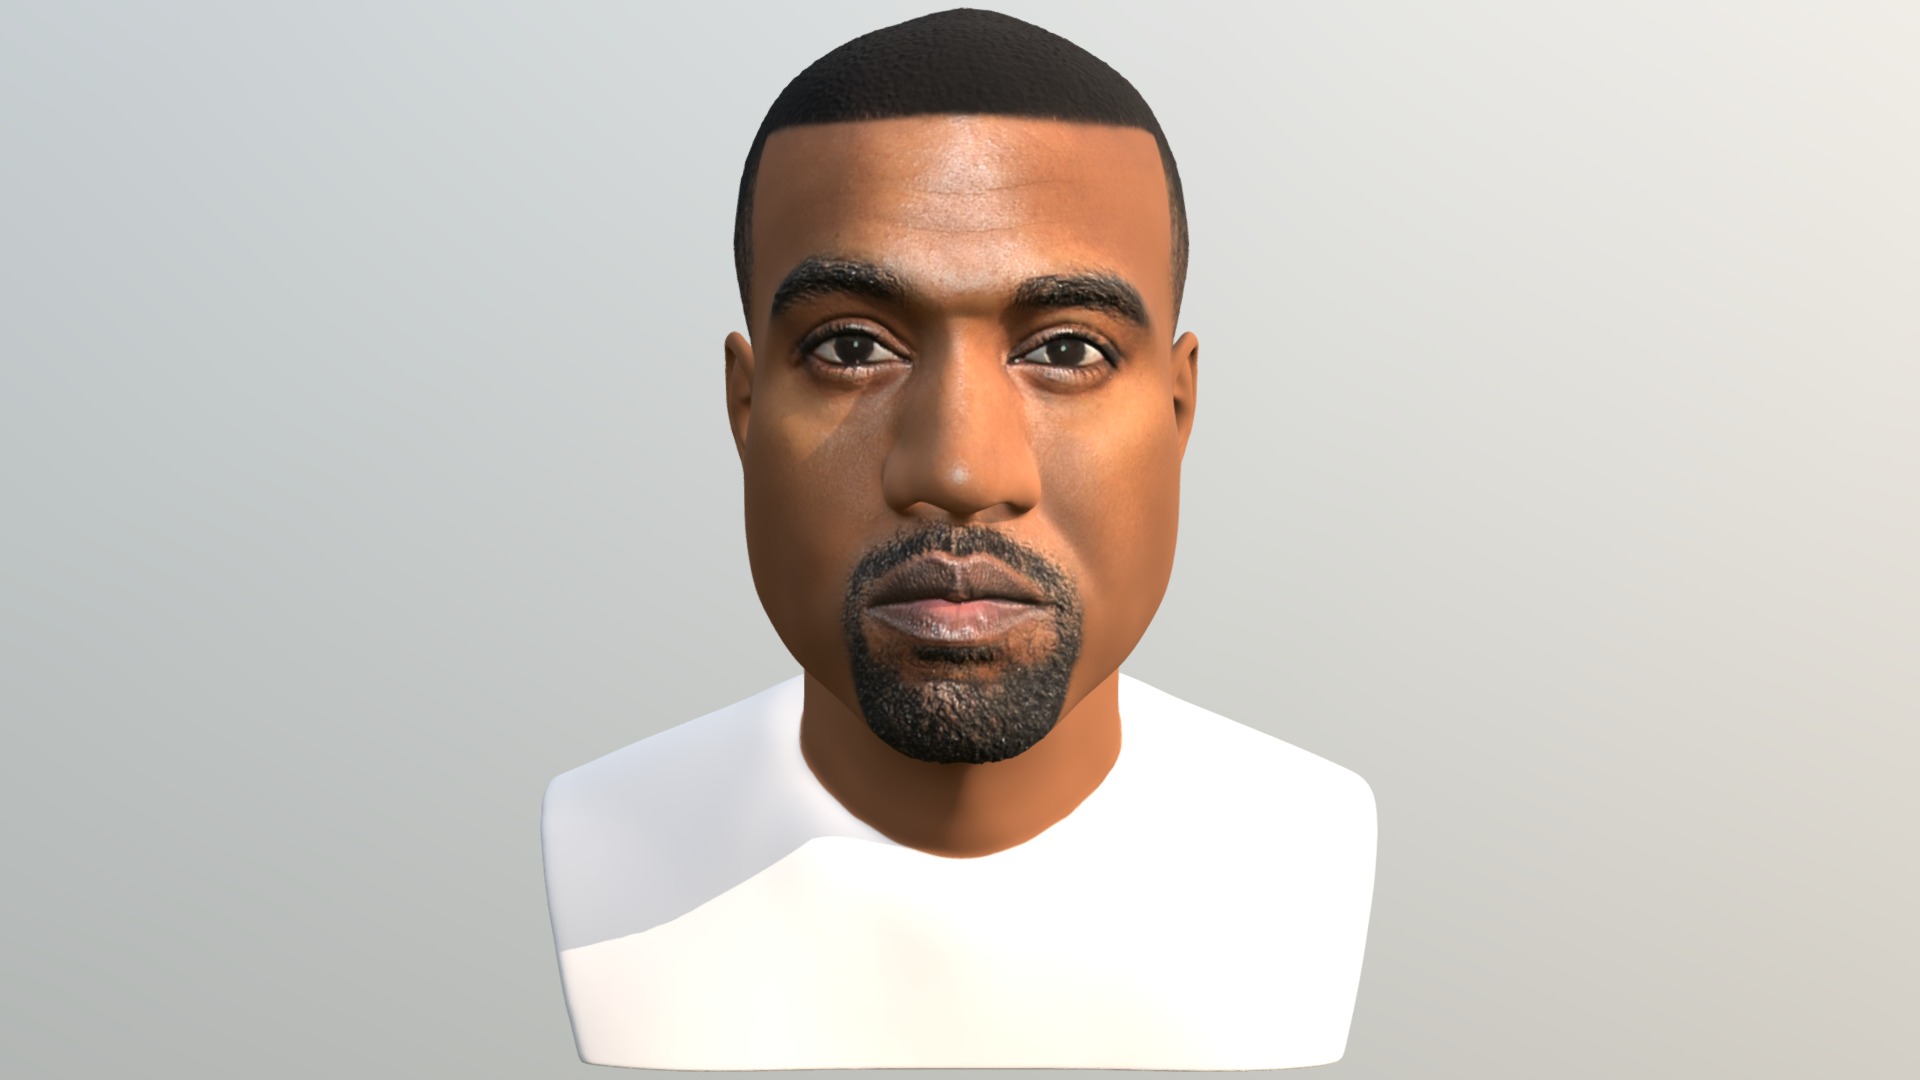 3D model Kanye West bust for full color 3D printing - This is a 3D model of the Kanye West bust for full color 3D printing. The 3D model is about a man with a beard.